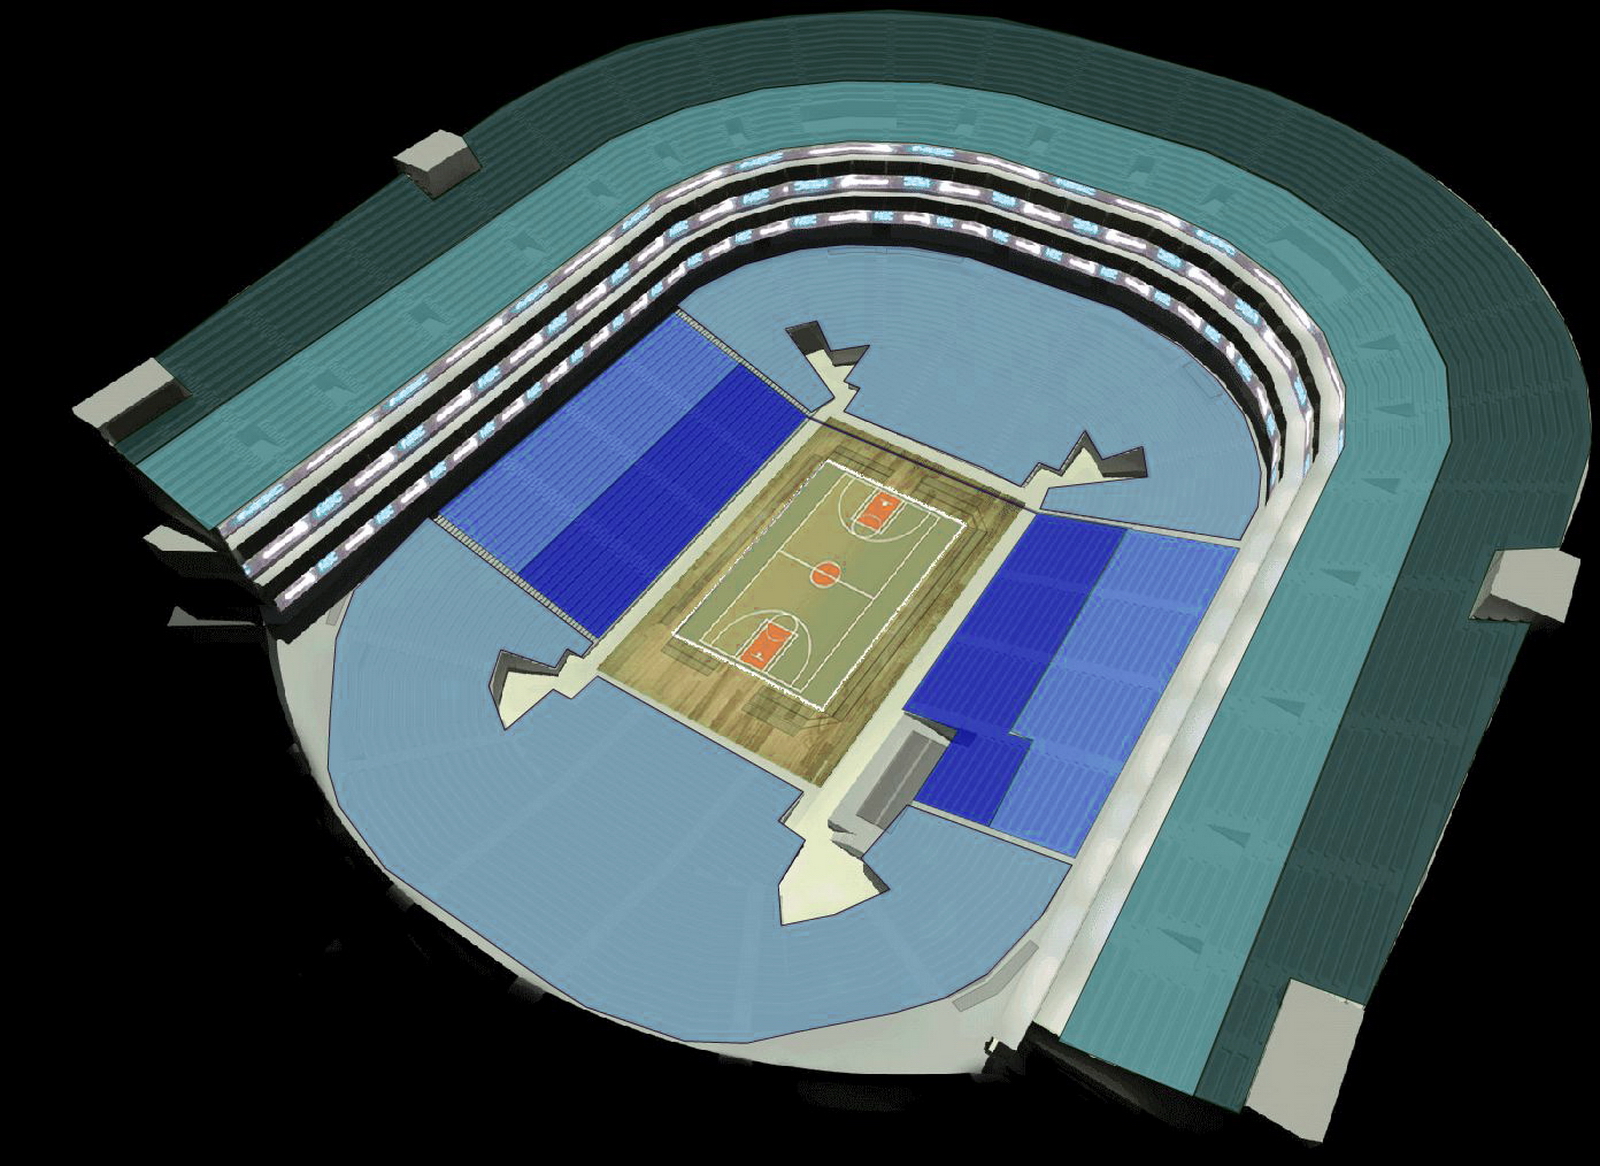 The O2 Arena London seating plan Plan perspective